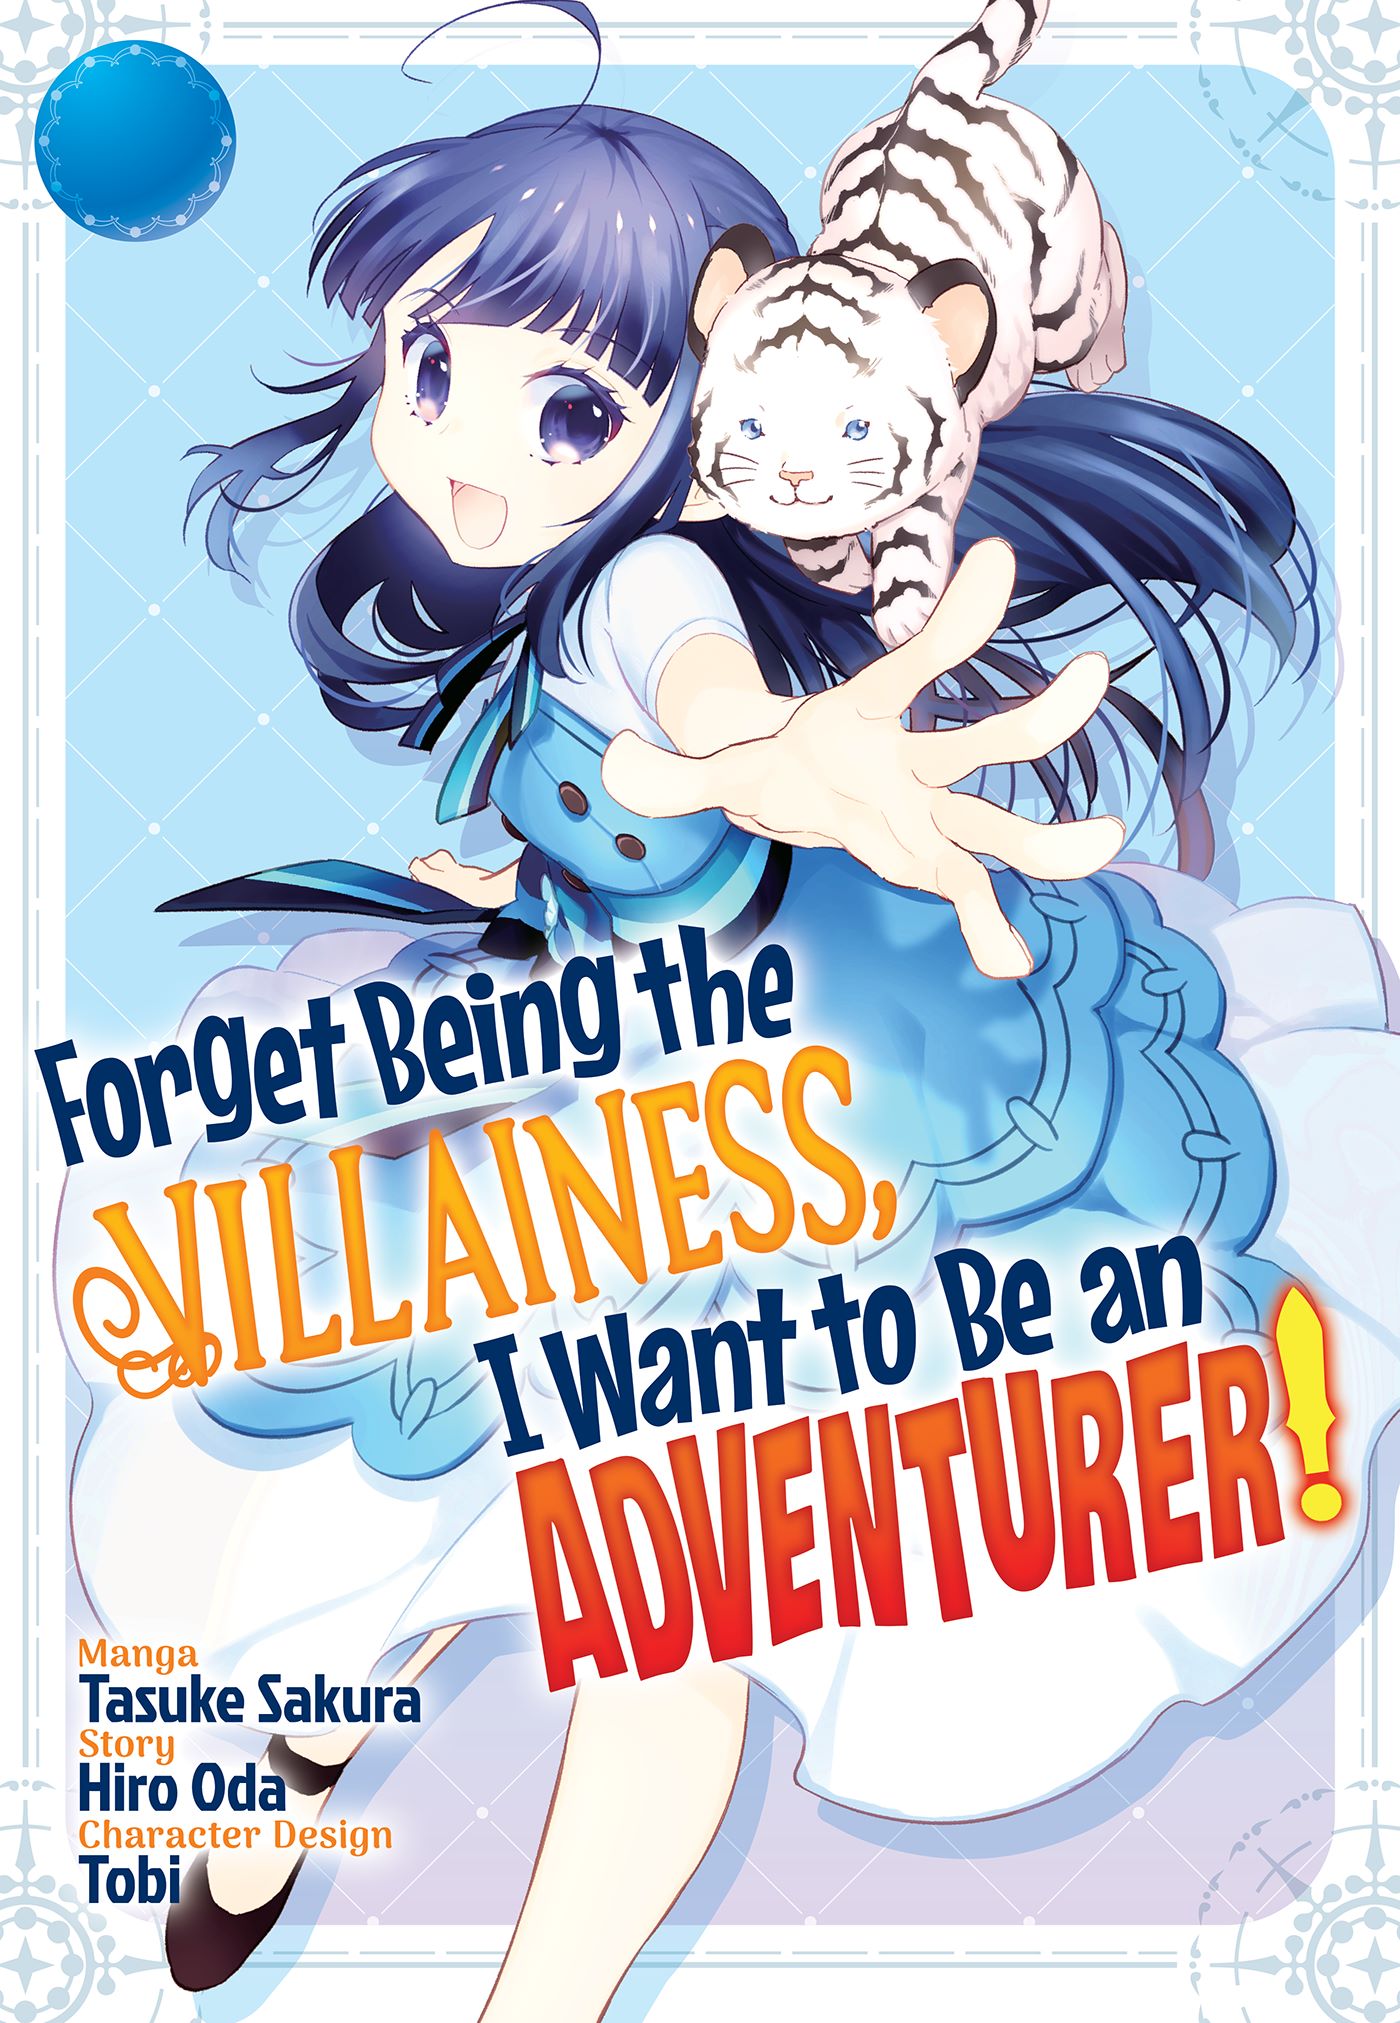 Forget Being the Villainess, I Want to Be an Adventurer! Manga Cover Vol. 1